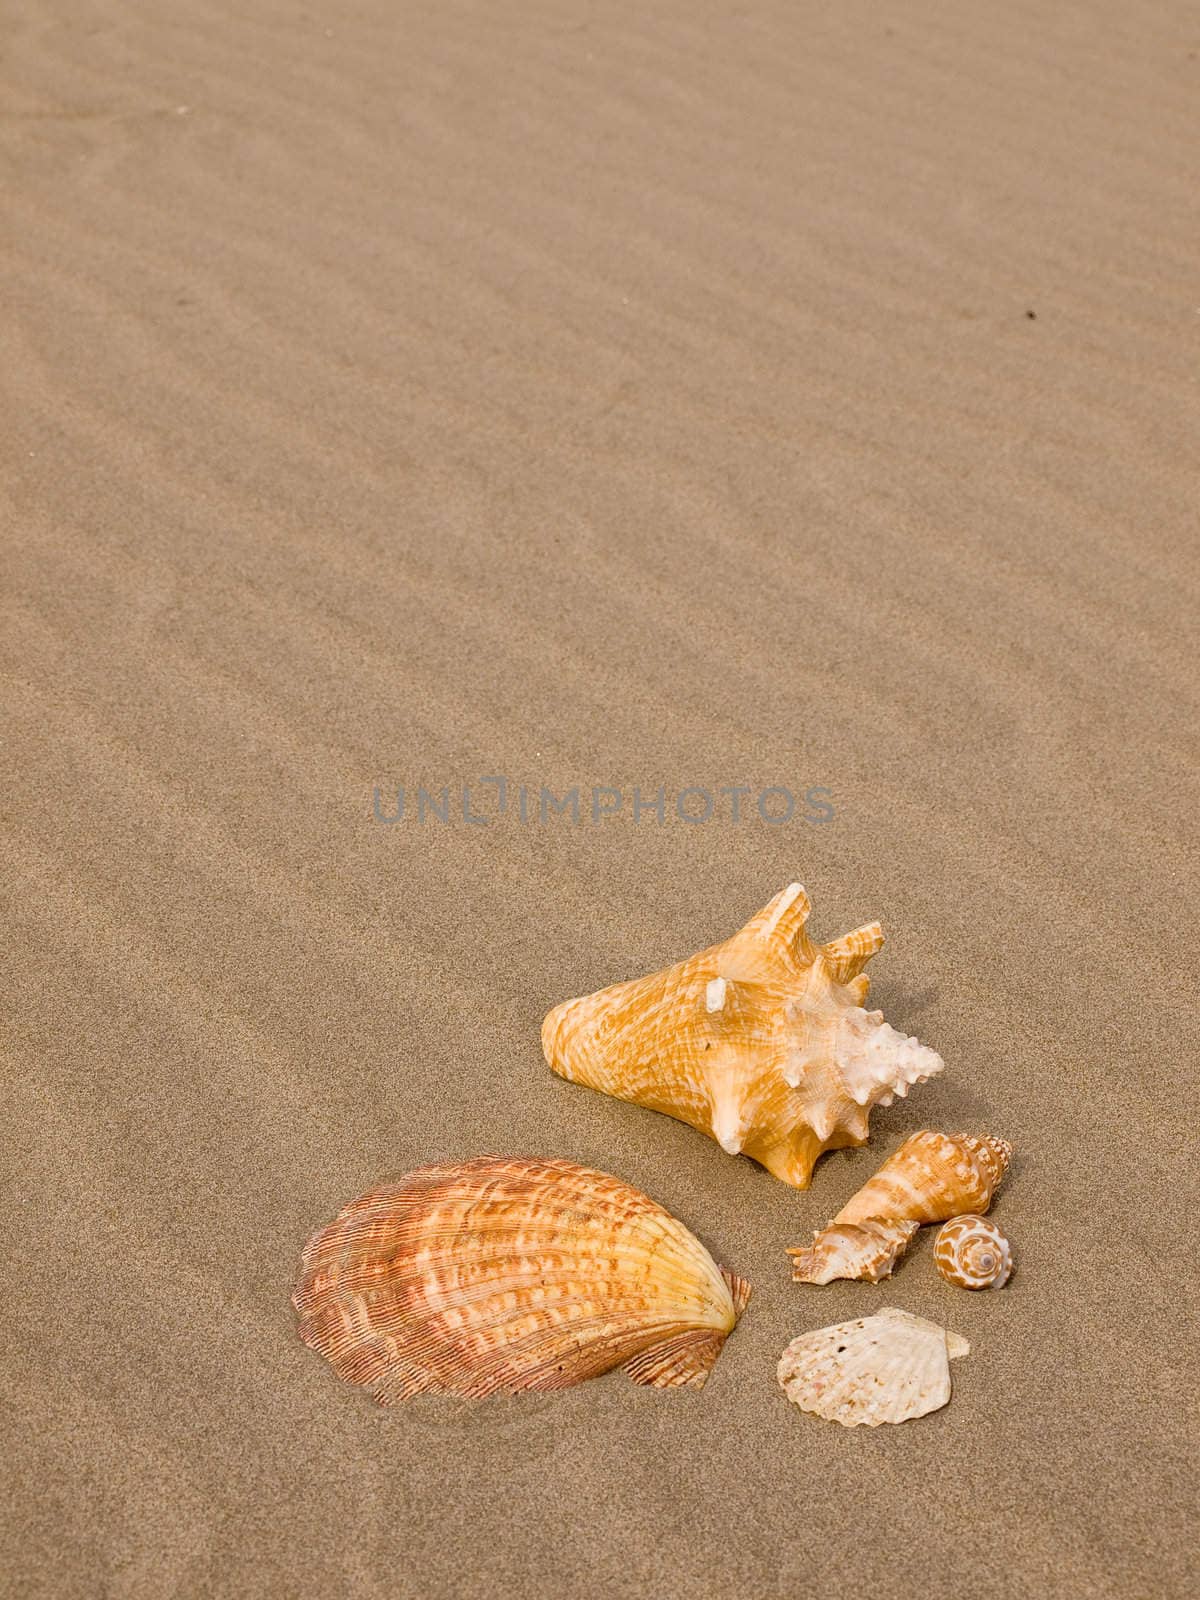 Scallop and Conch Shells on a Wind Swept Sandy Beach